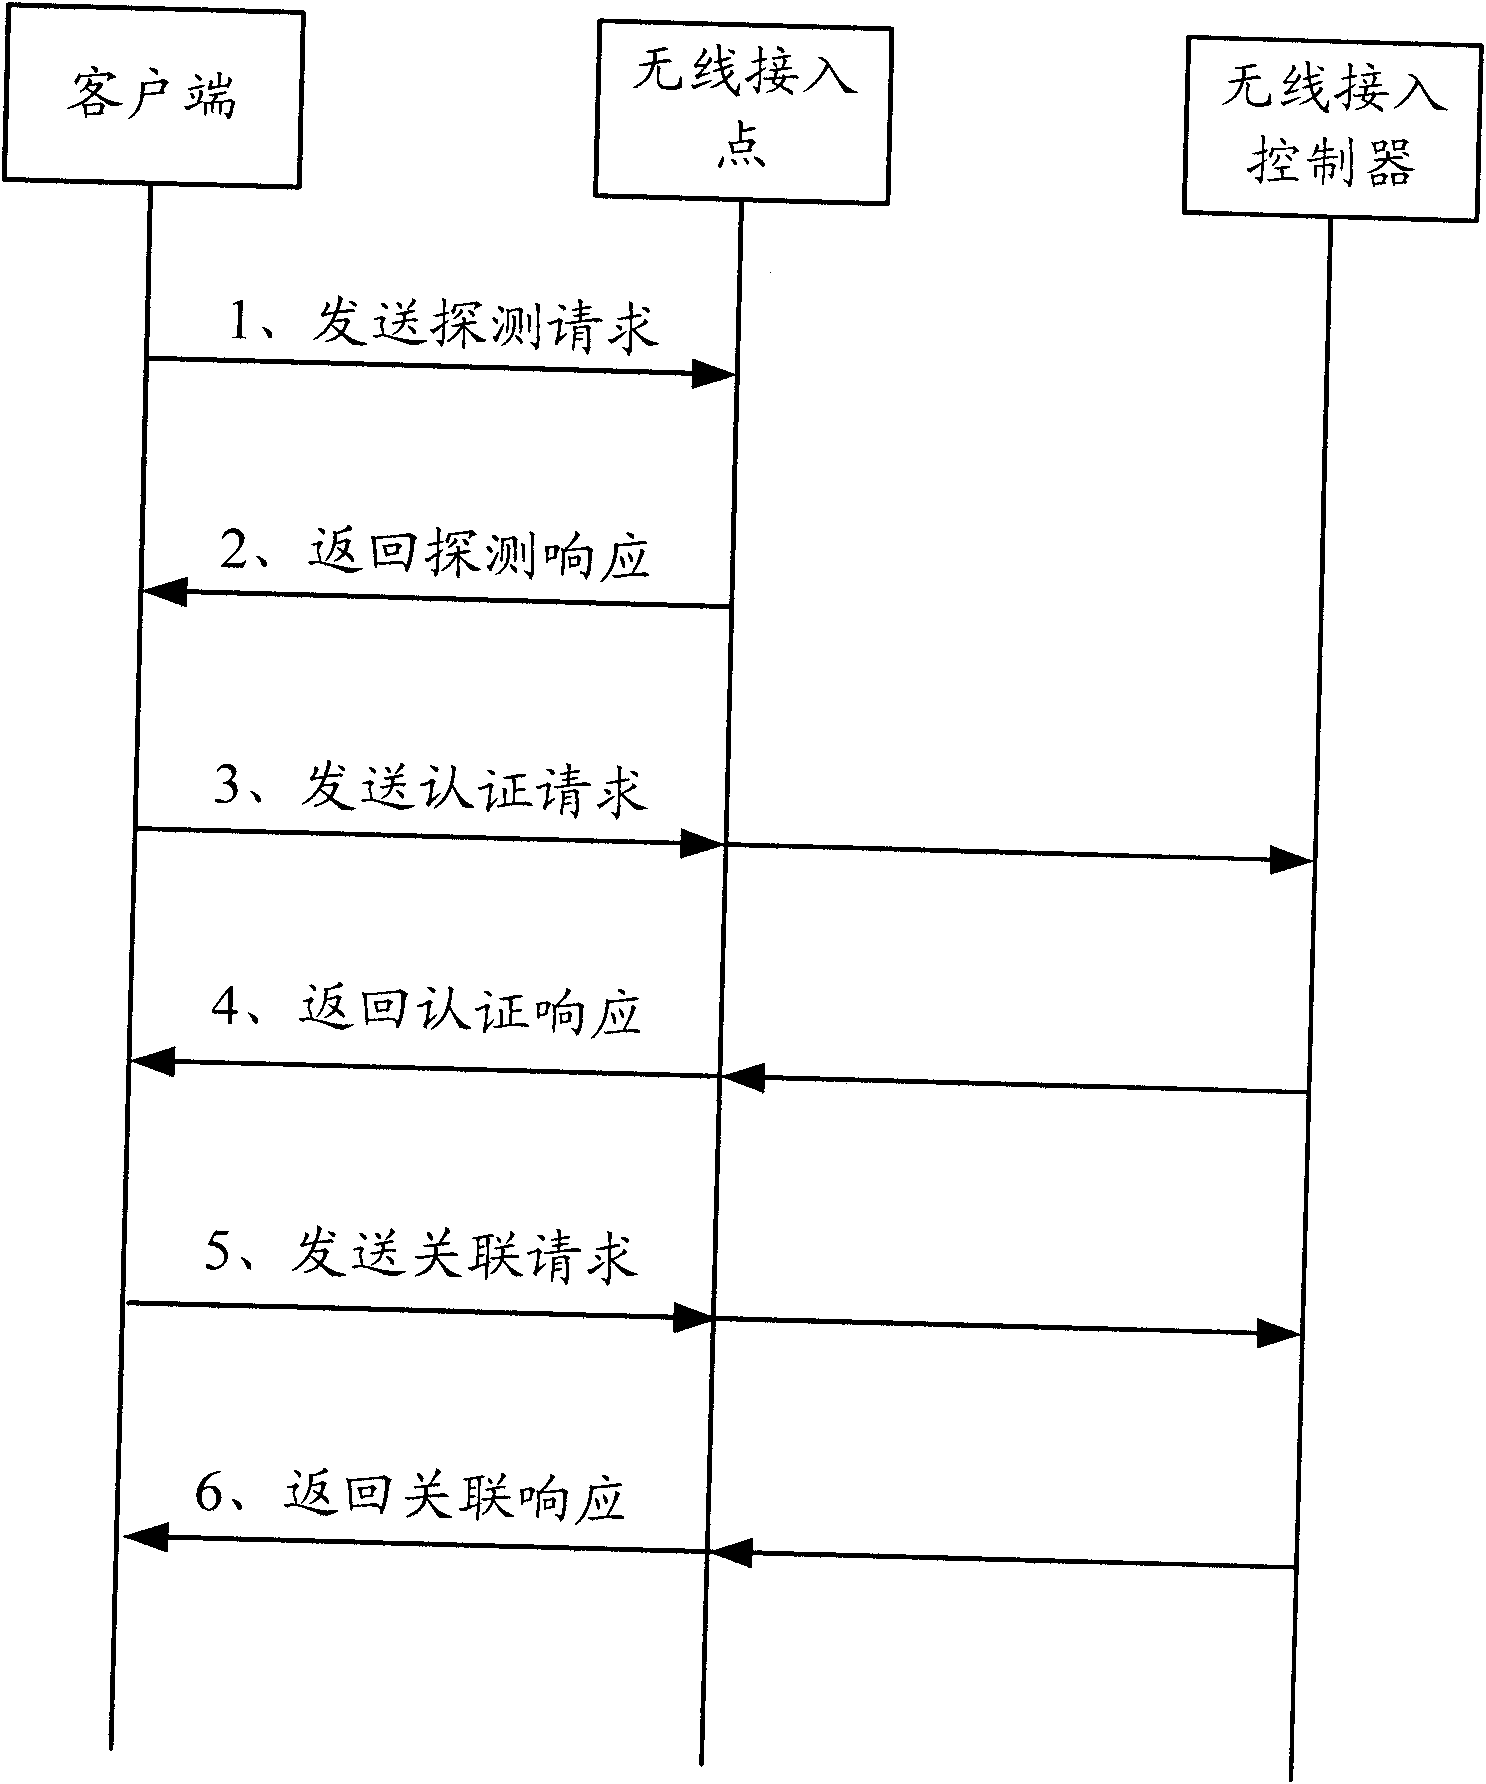 Method and equipment for selecting access points (APs)